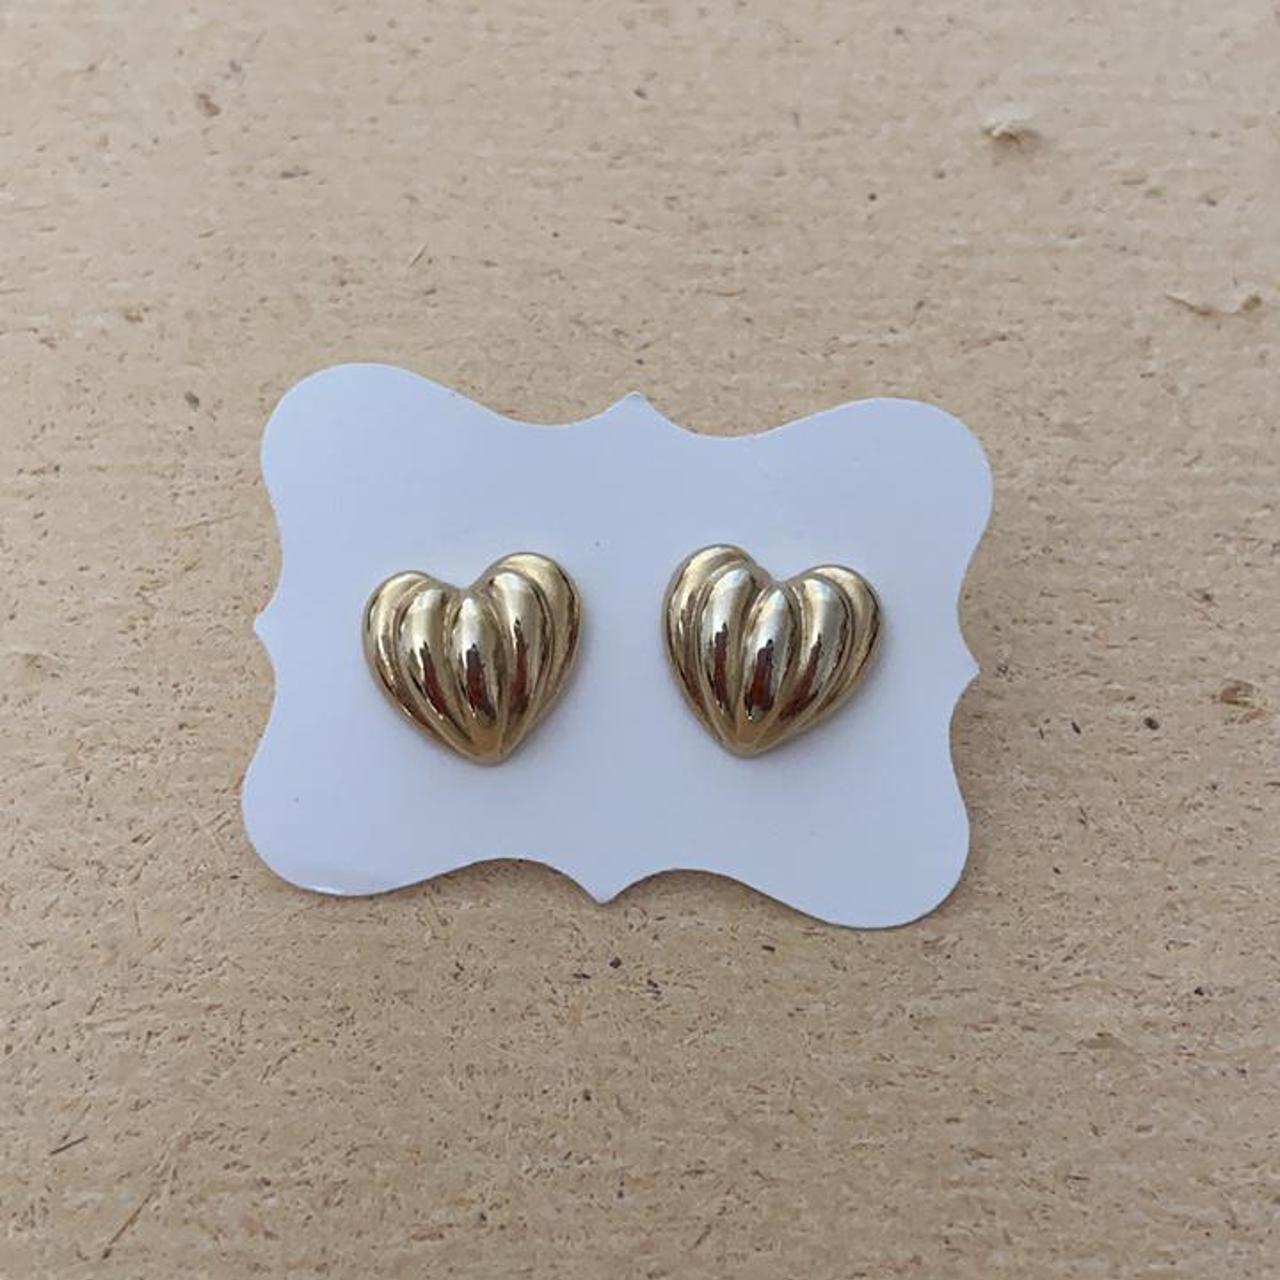 Product Image 2 - Vintage golden textured hearts earrings